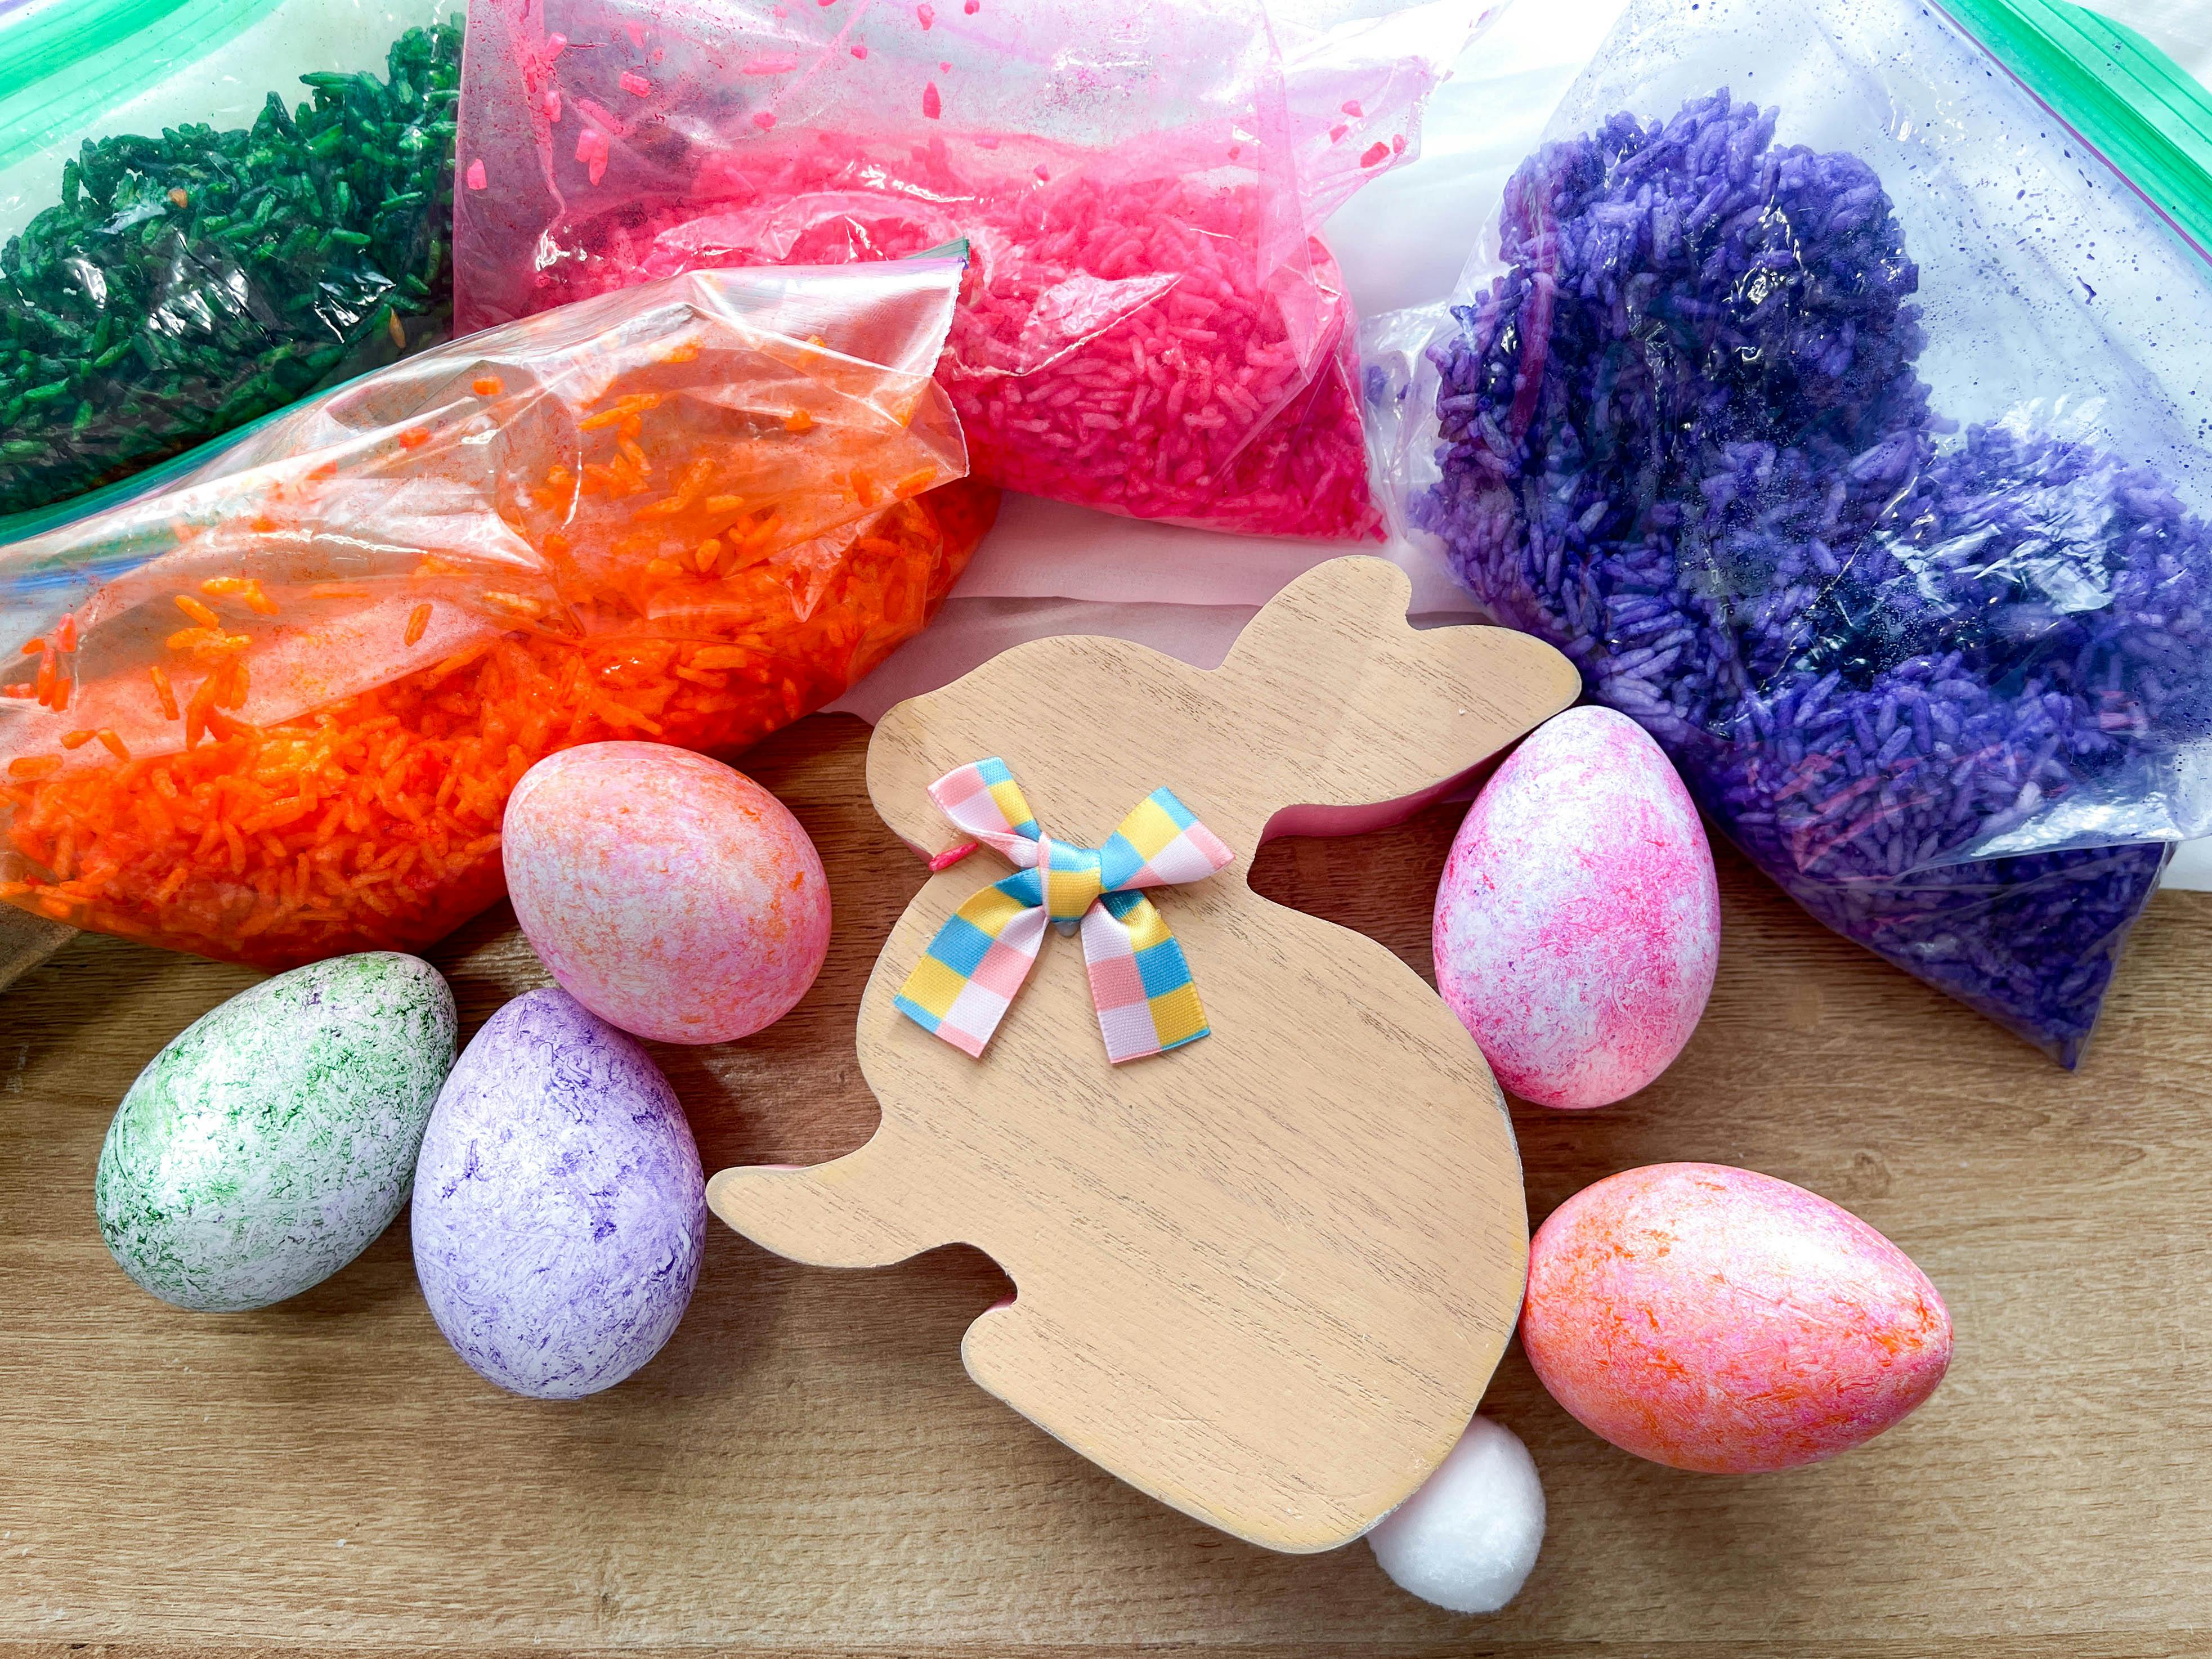 Dyed plastic eggs next to easter decor and bags of colored rice on a table